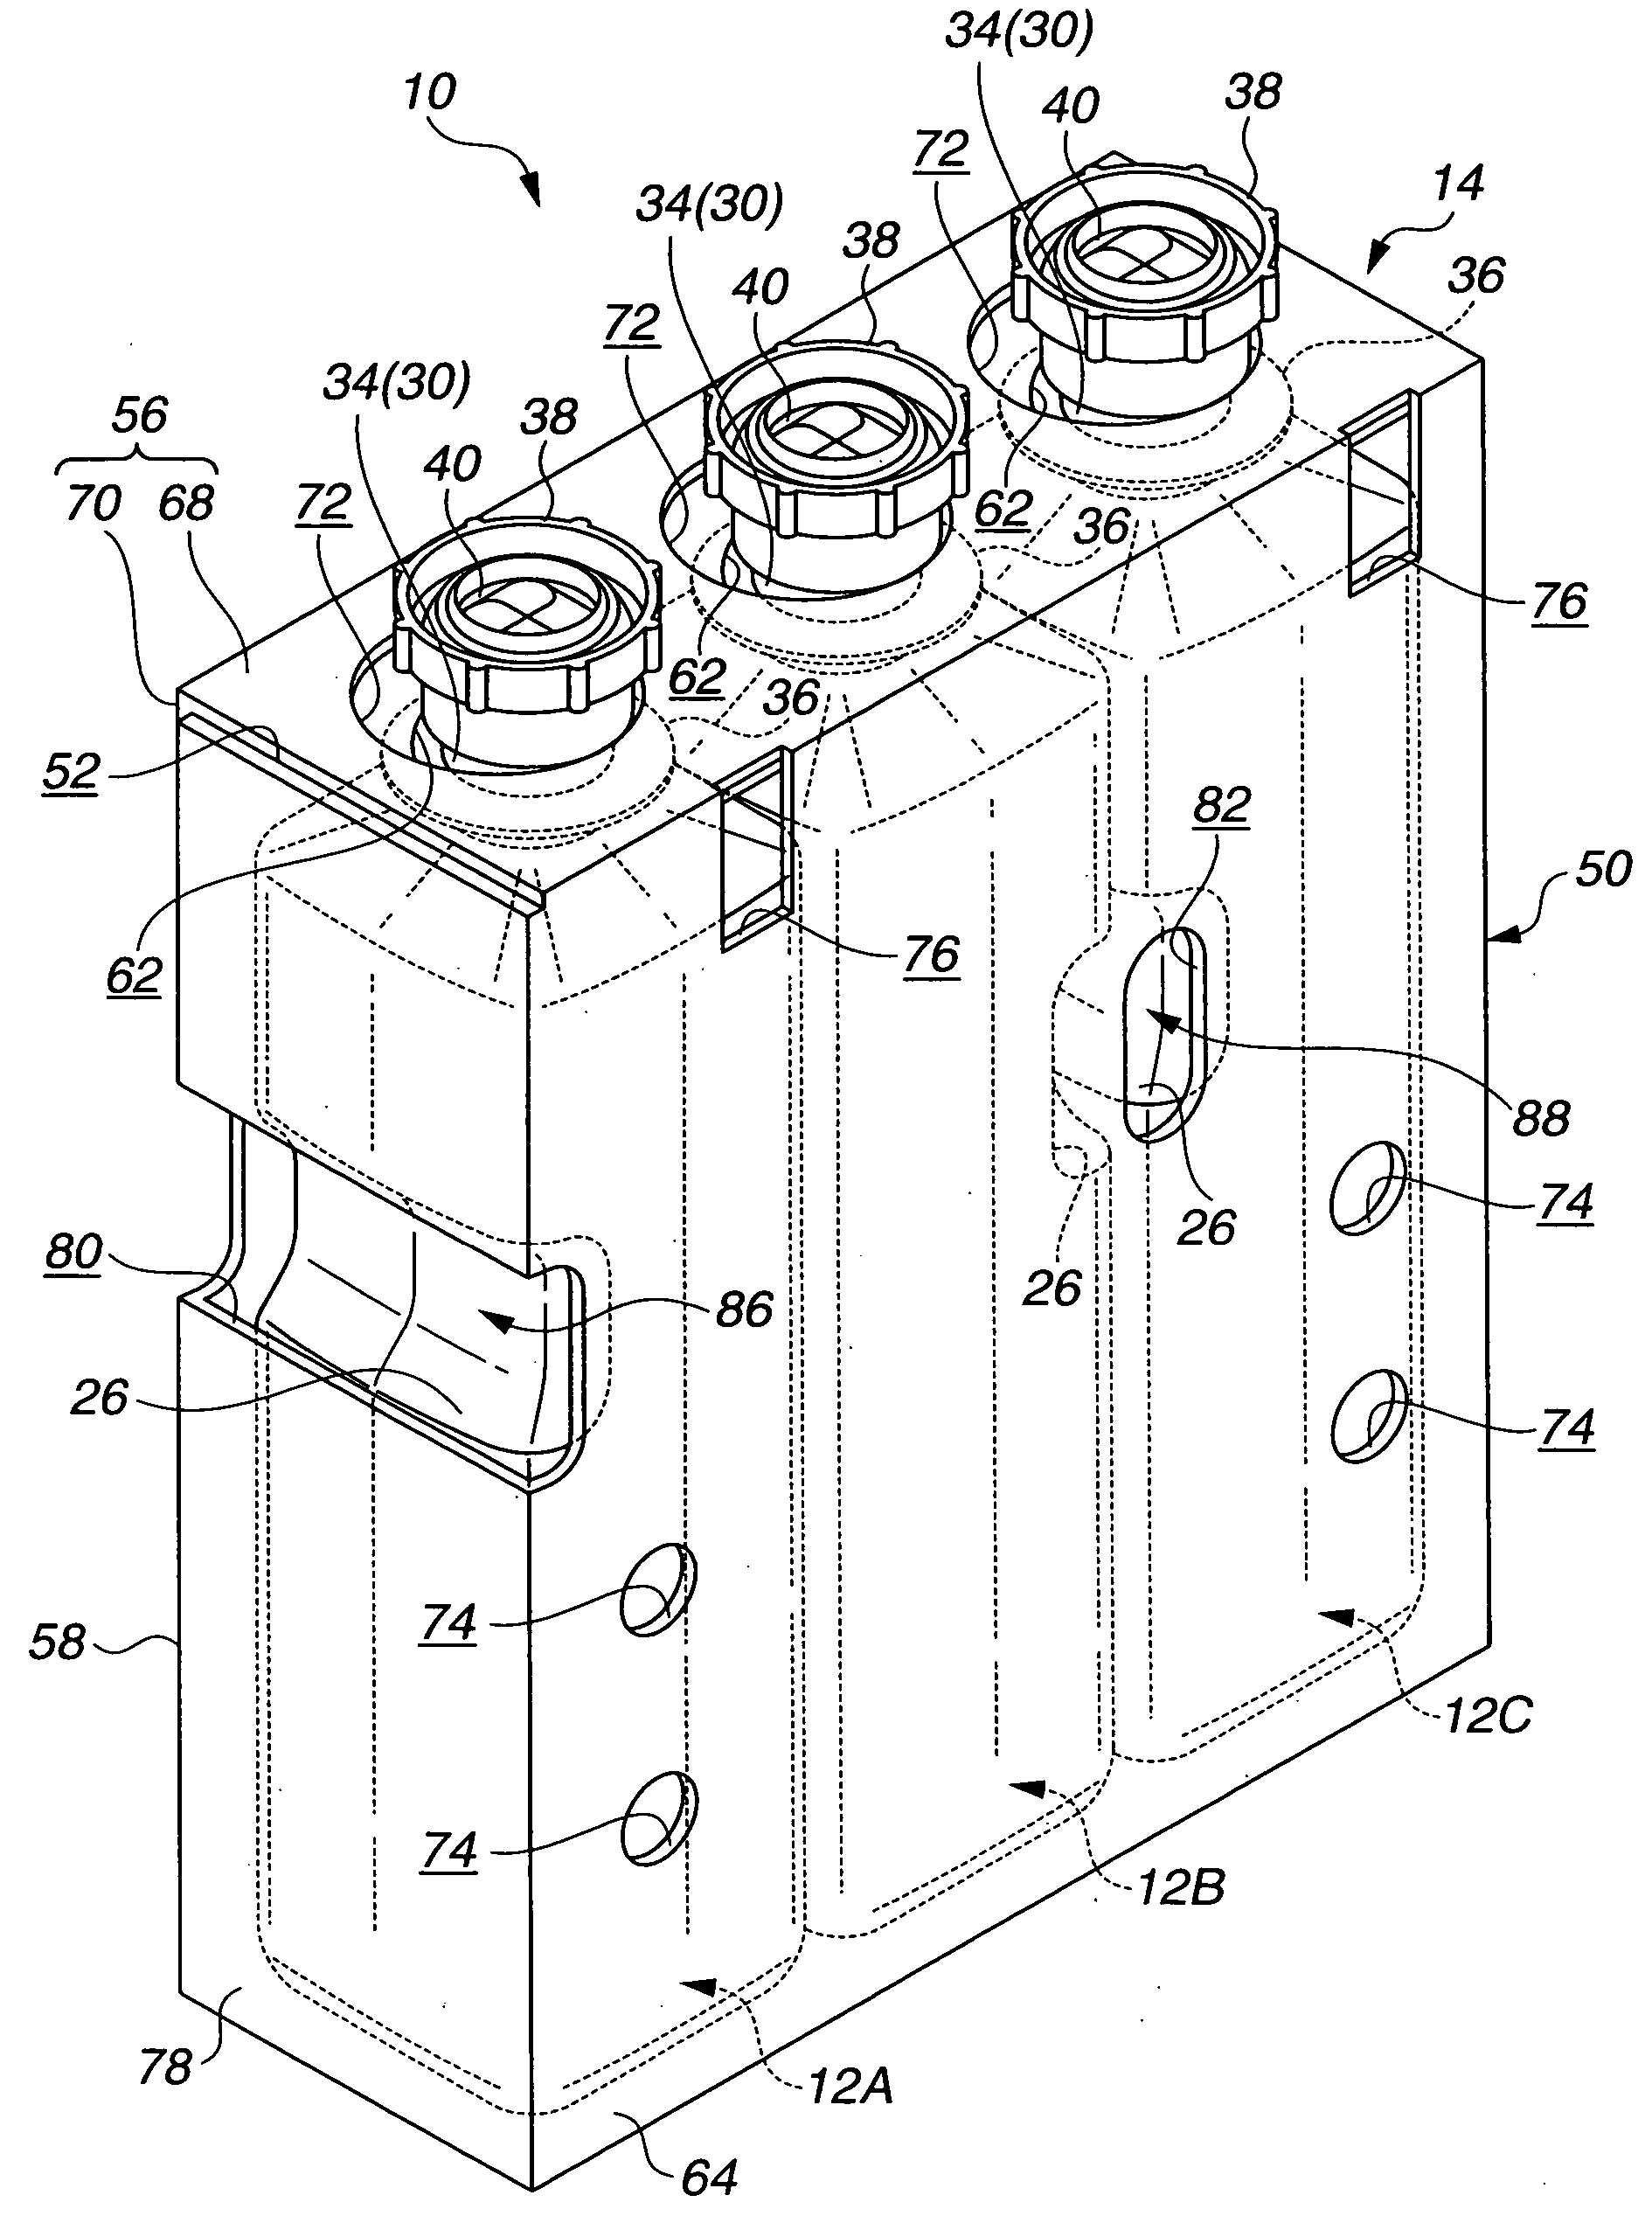 Photographic processing agent cartridge and container usable therein